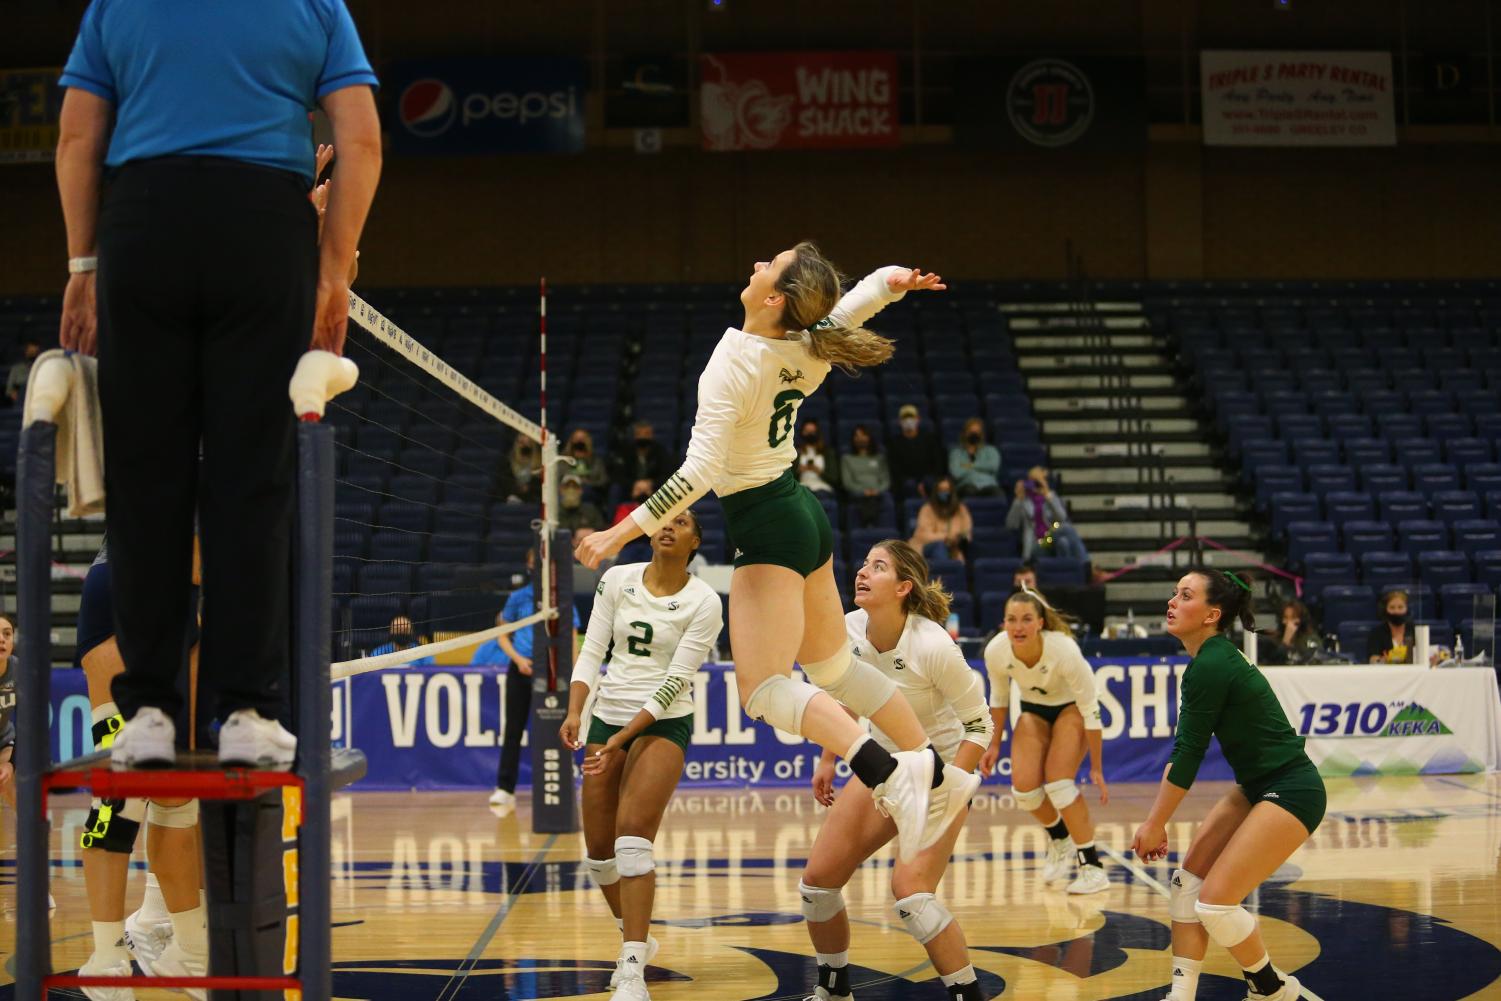 Freshman outside hitter Bridgette Smith attempts a kill at the Bank of Colorado Arena on Wednesday, March 31, 2021 in the Hornets' first round matchup against Northern Arizona. Sac State lost the match 3-0 as their season came to an end.